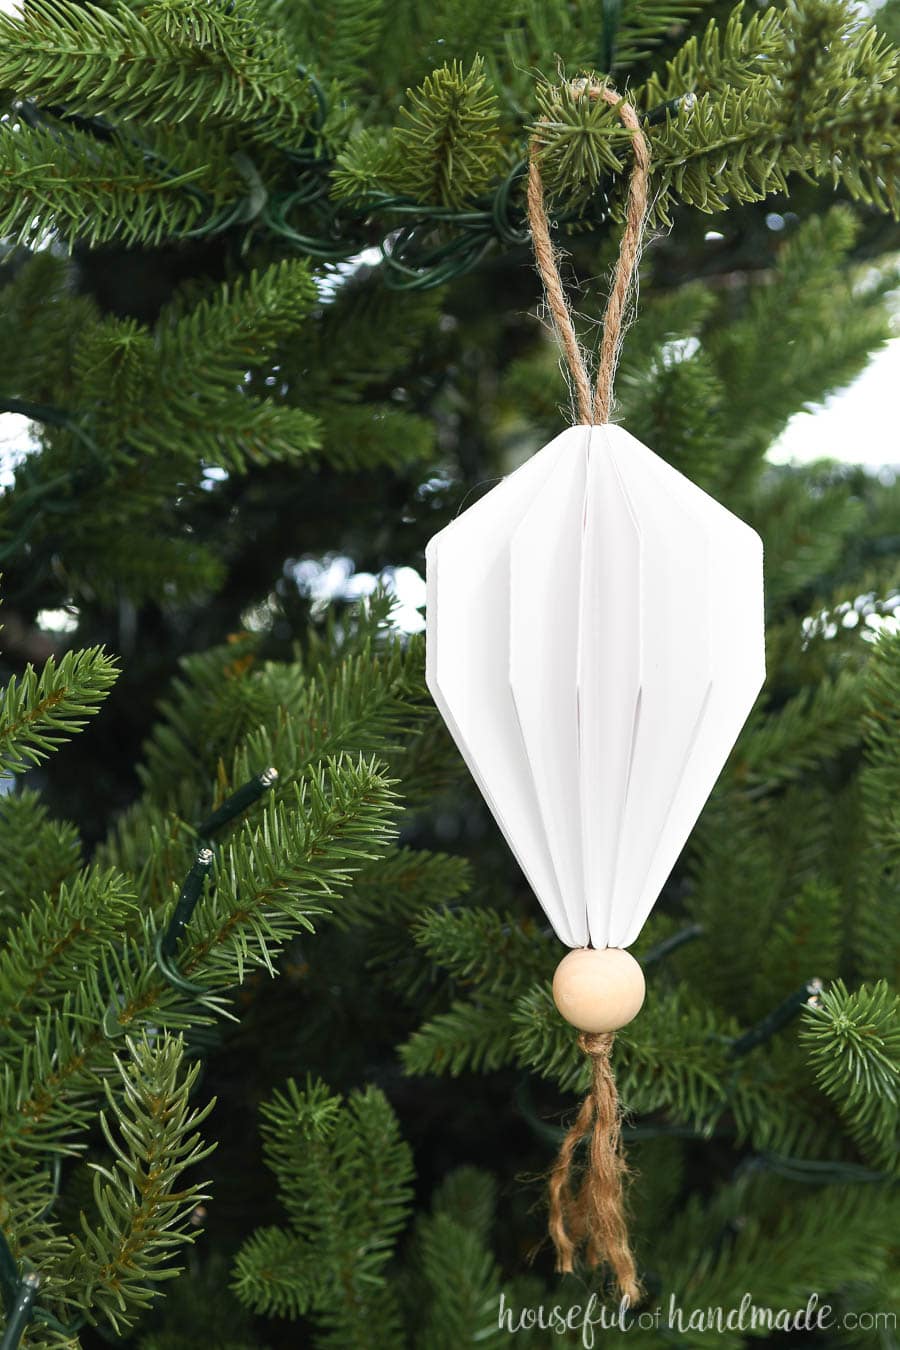 Close up of the 3D paper Christmas ornament with an origami jewel design.